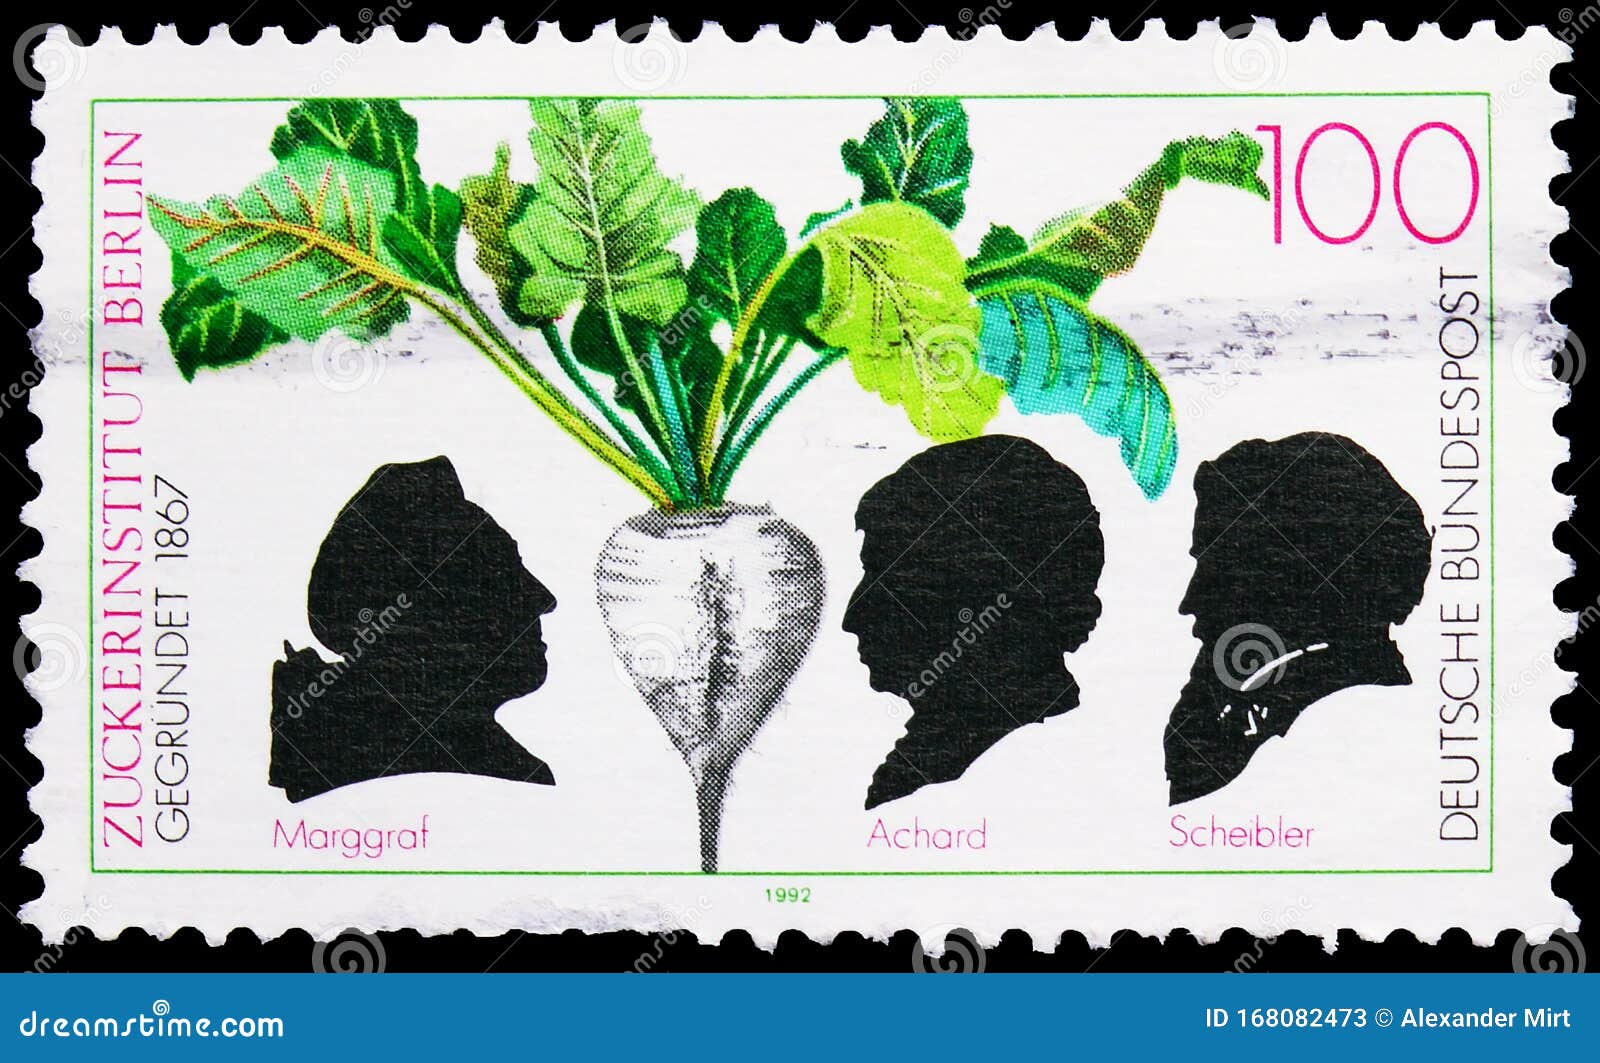 Postage Stamp Printed in Germany Shows Andreas Marggraf, Beet, Franz Achard and Carl Scheibler, Berlin Sugar Institute Serie, Editorial Stock Photo - Image of marggraf, russia: 168082473